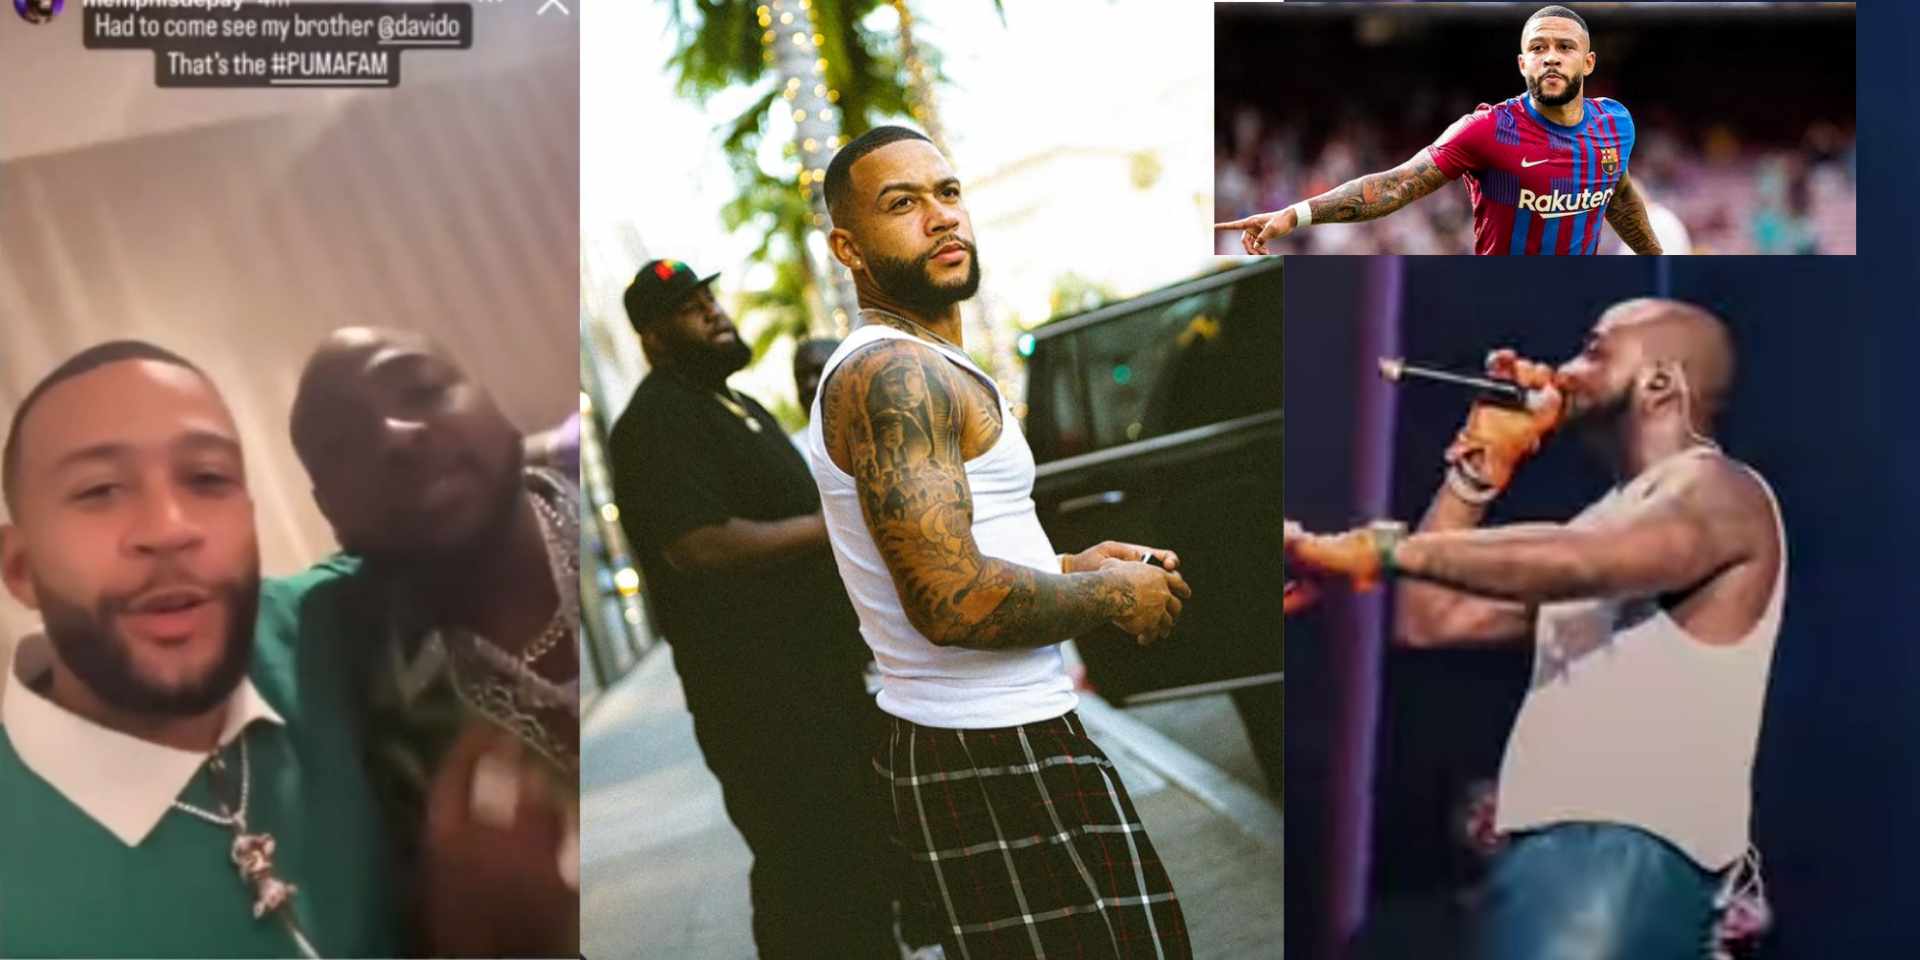 Memphis Depay came out to support Davido at his LA concert 